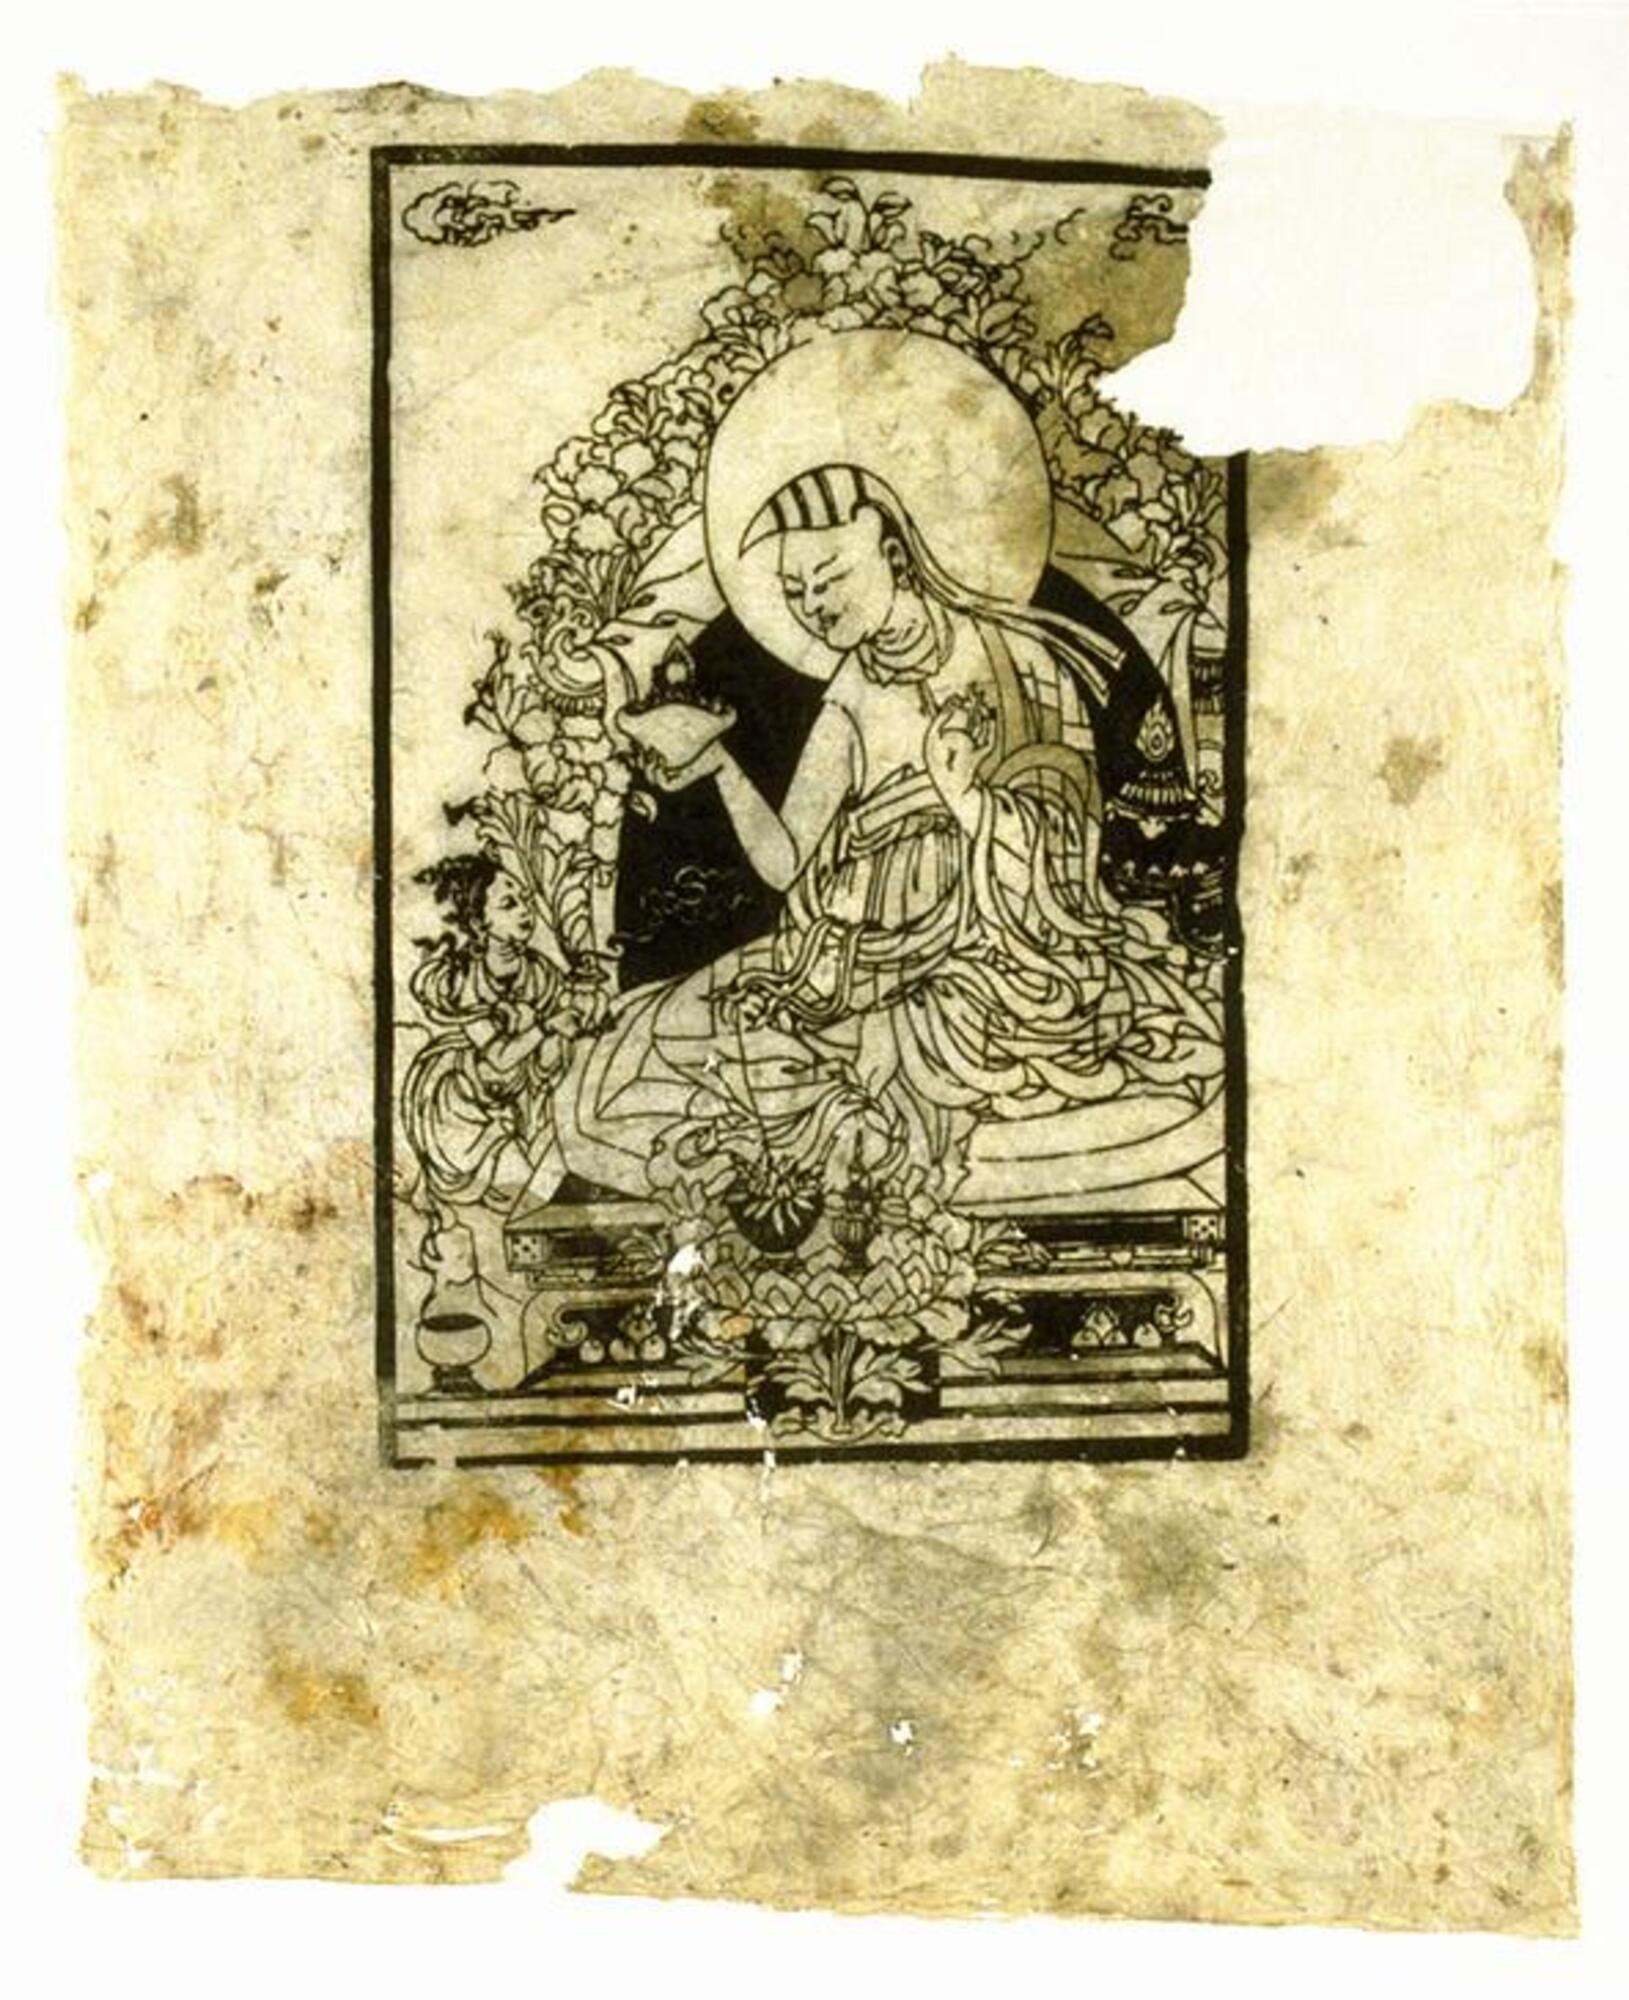 A woodblock print on paper, with large tears at the upper right hand and lower left hand corners, much abraded. Formerly placed insite the conch trumpet 1982/2.42 as a talisman.